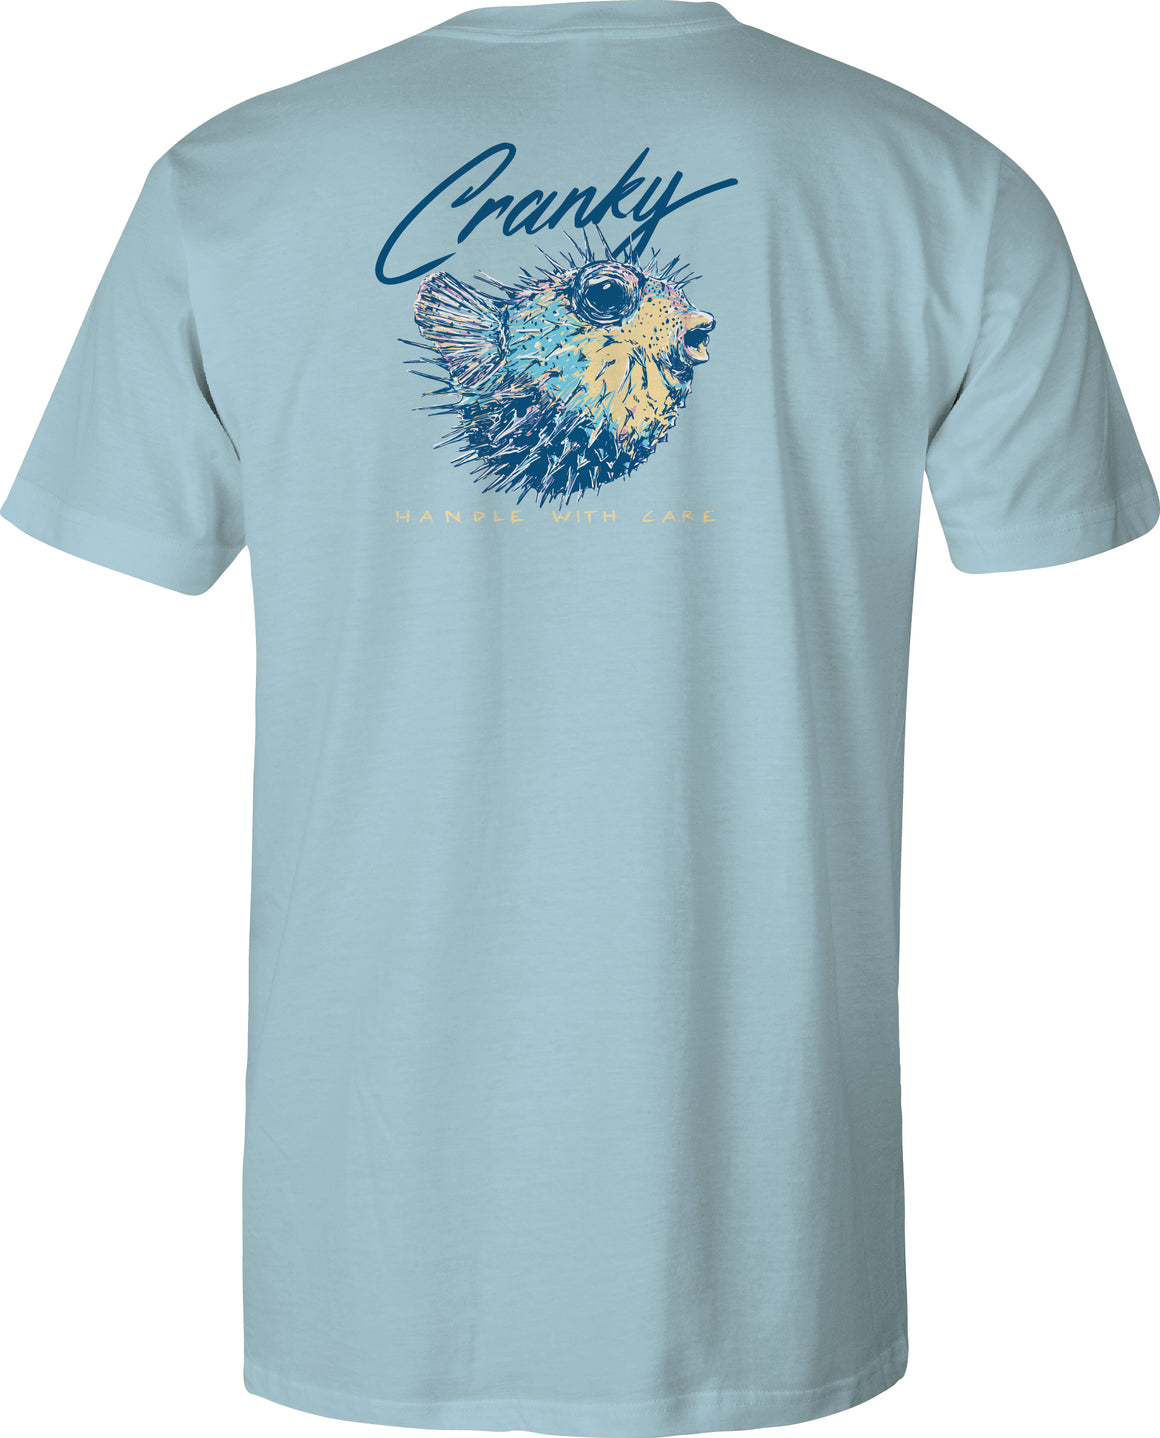 Adult Short Sleeve Tee Handle with Care - Sky Blue